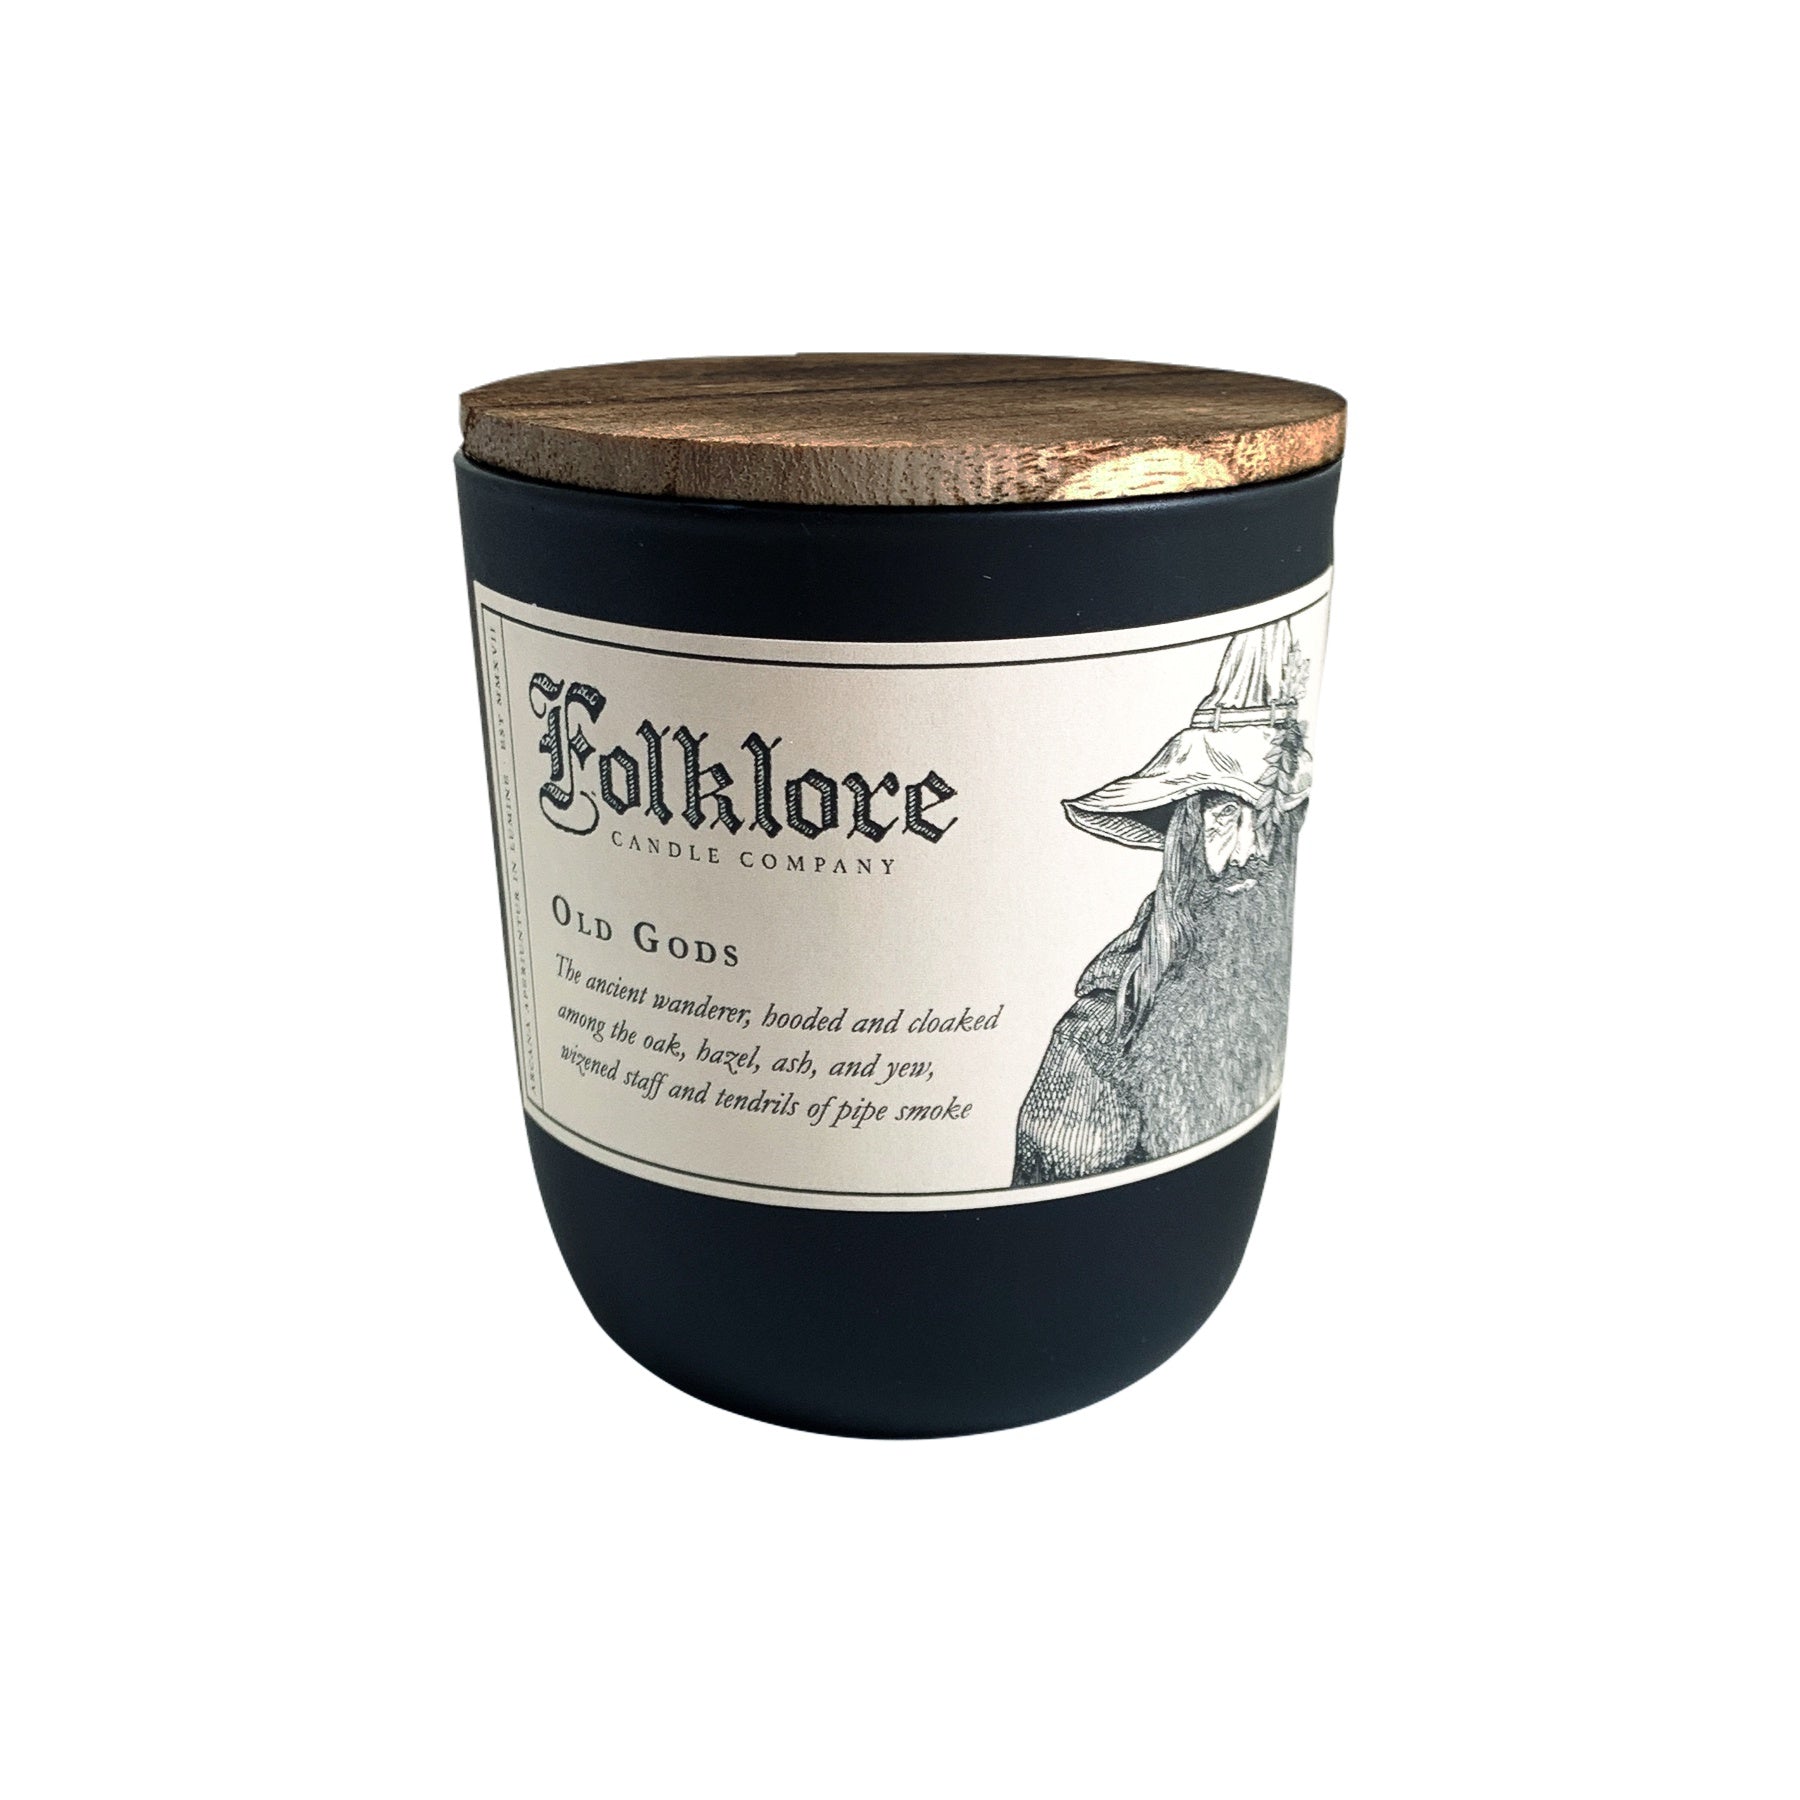 Old Gods - Folklore Candle Company